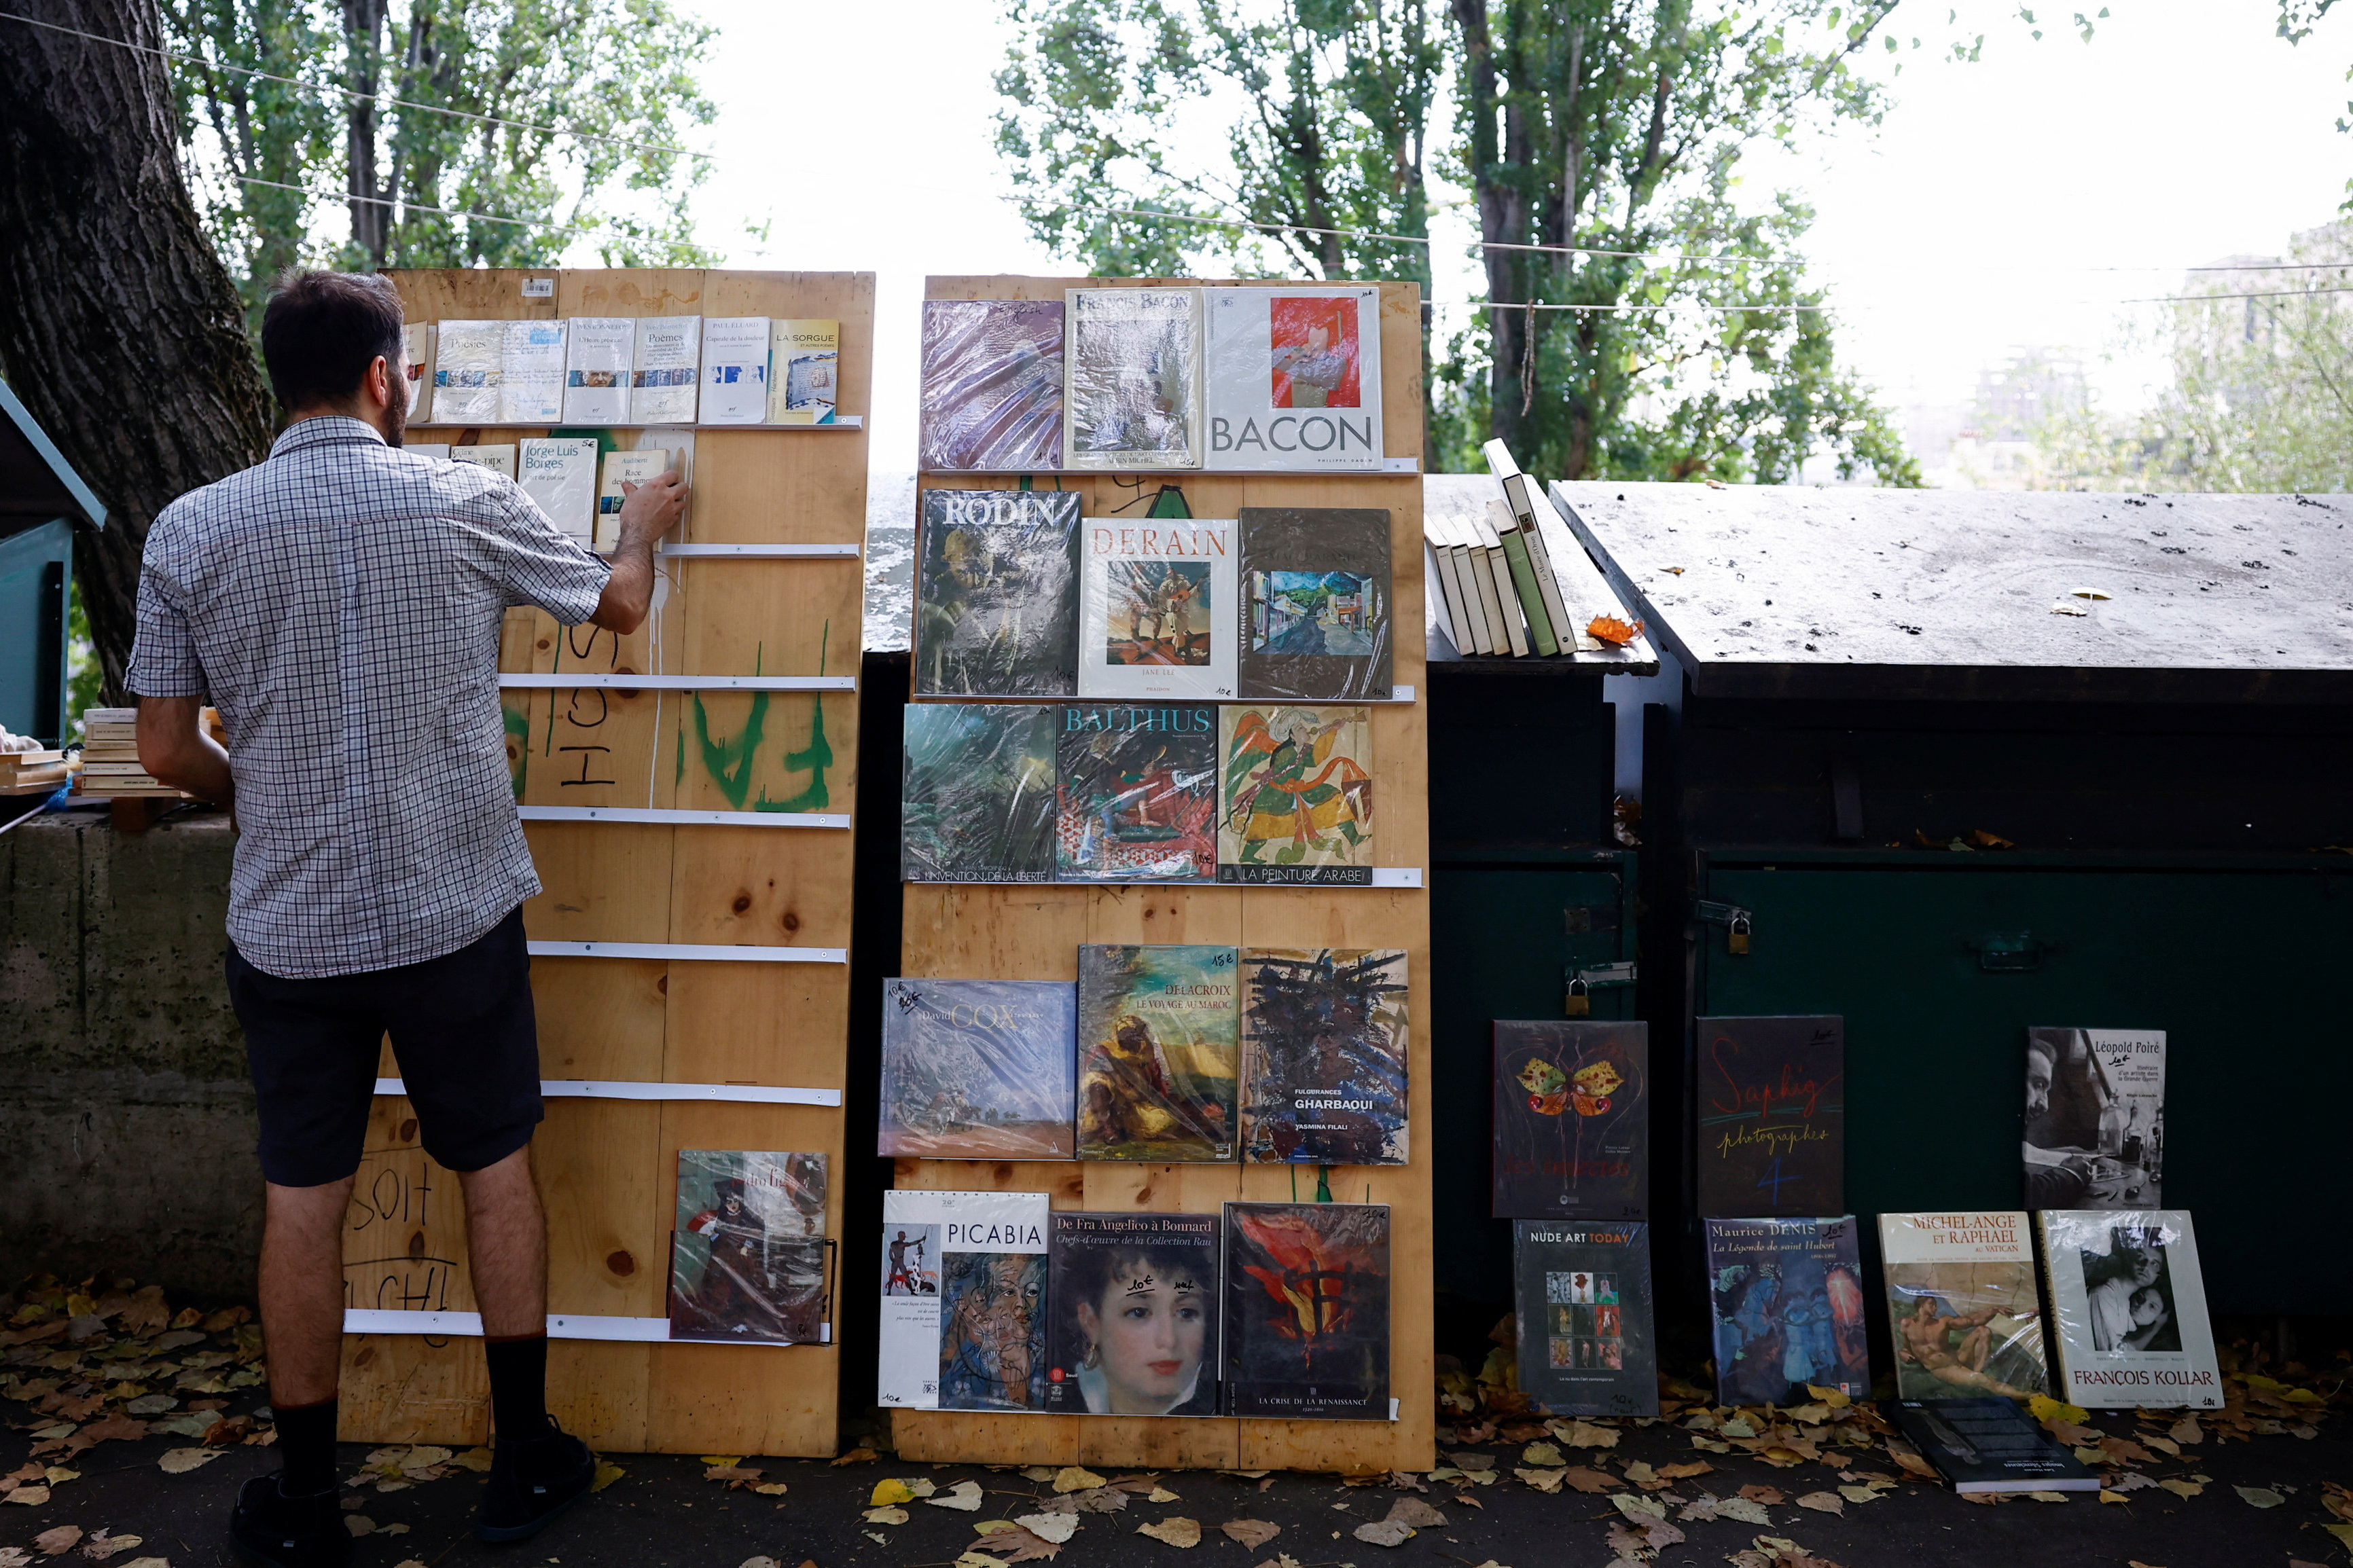 New Parisian bouquiniste, traditional street bookseller, places books on shelves along the banks of the River Seine in Paris